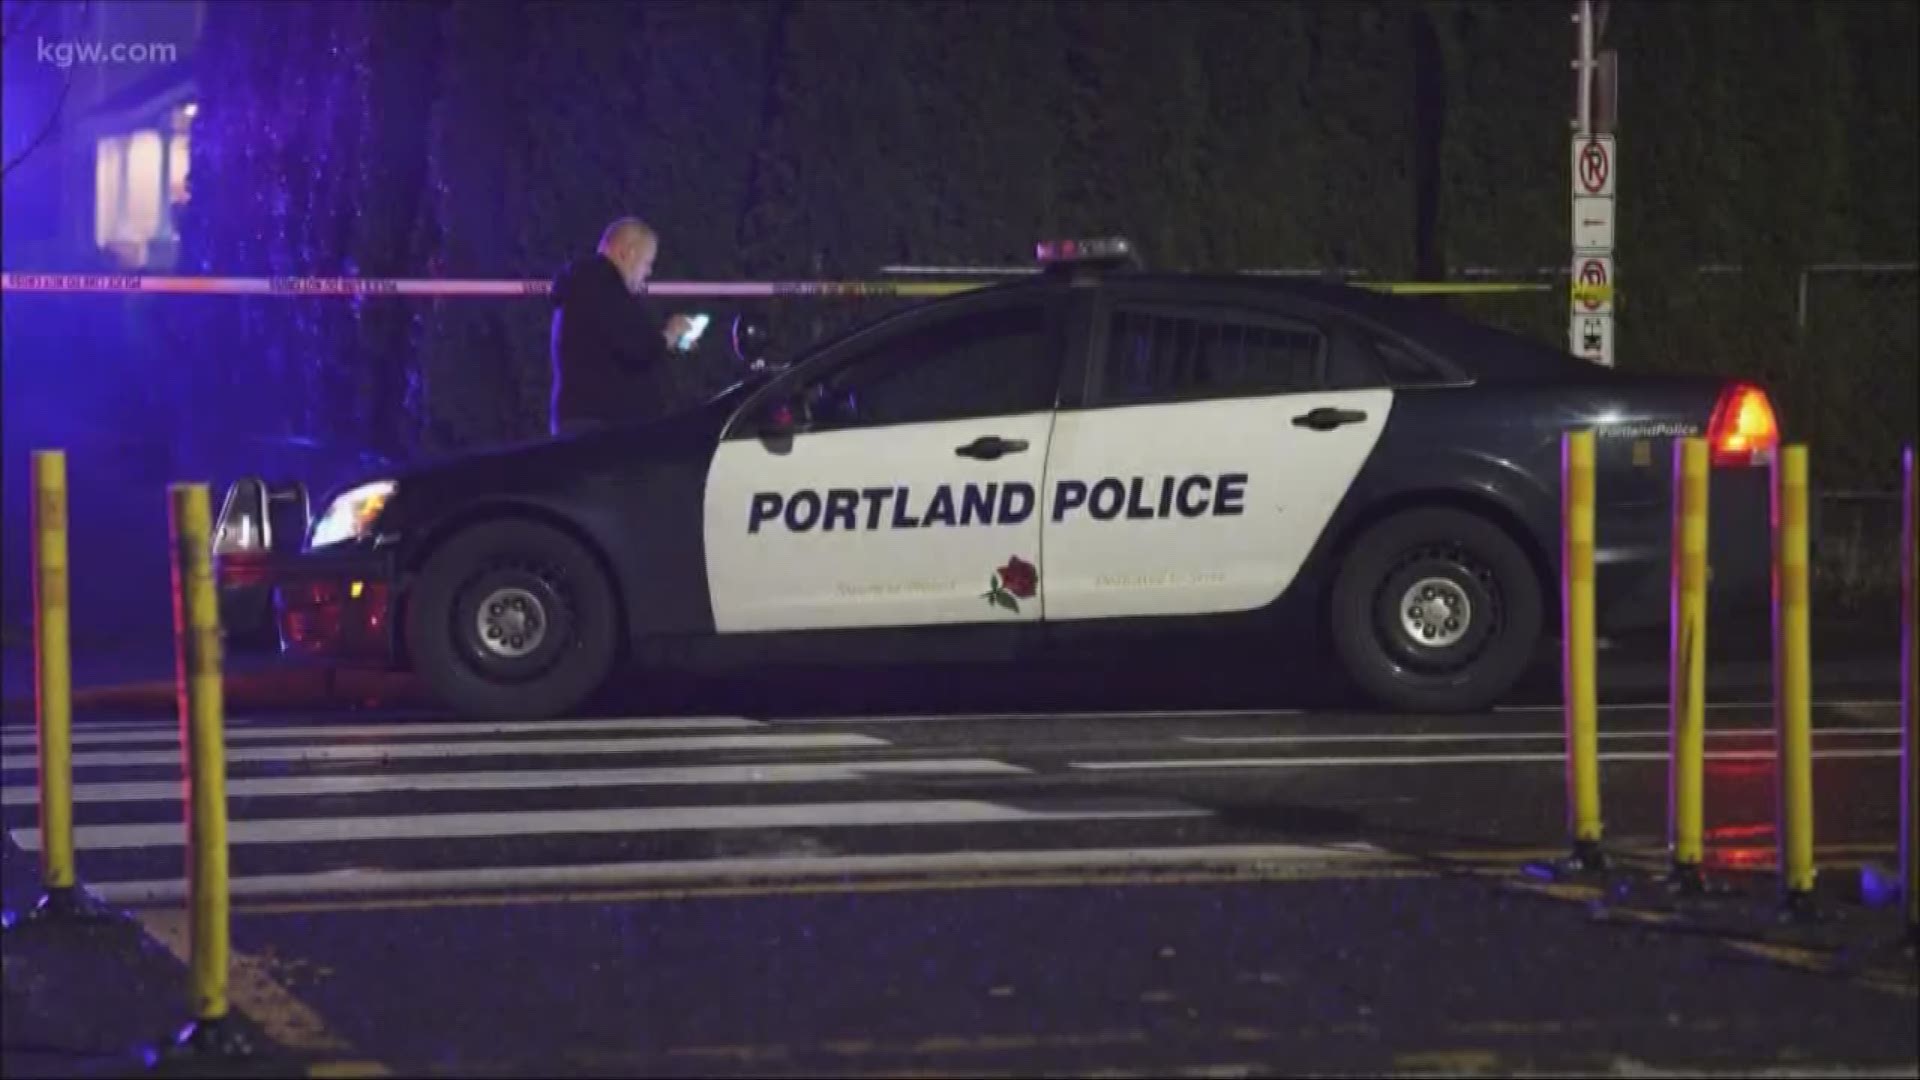 Three men were shot overnight in Portland. We are 47 days into the New Year and this is the 80th shooting, according to police.